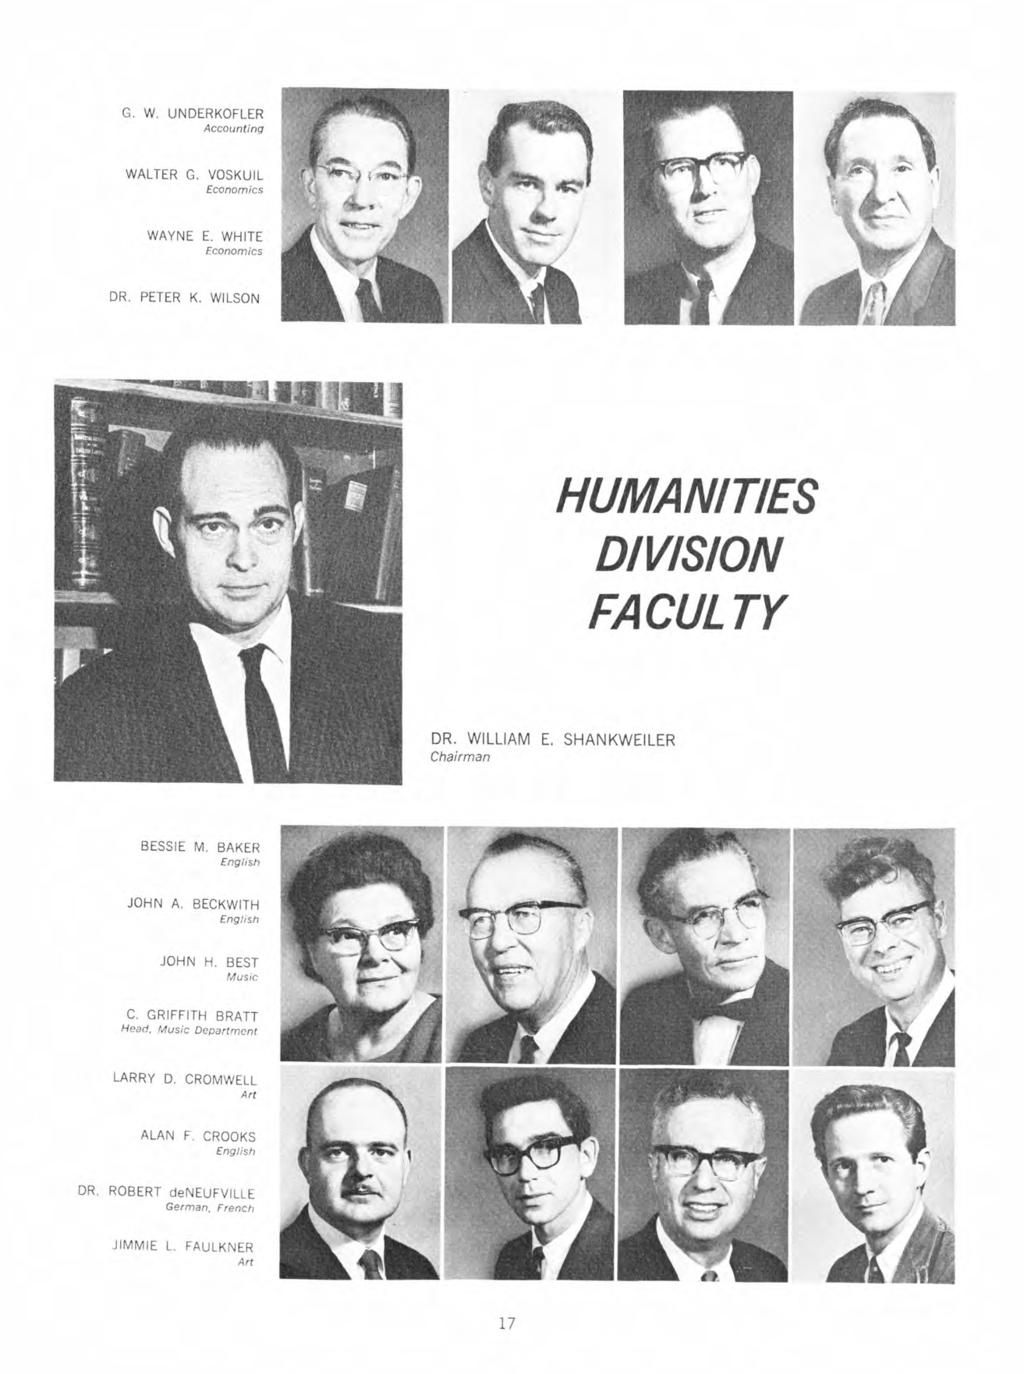 G. W. UNDERKOFLER Accounting WALTER G. VOSKUIL Economics WAYNE E. WHITE Economics DR. PETER K. WILSON HUMANITIES DIVISION FACULTY DR. WILLIAM E. SHANKWEILER BESSIE M.